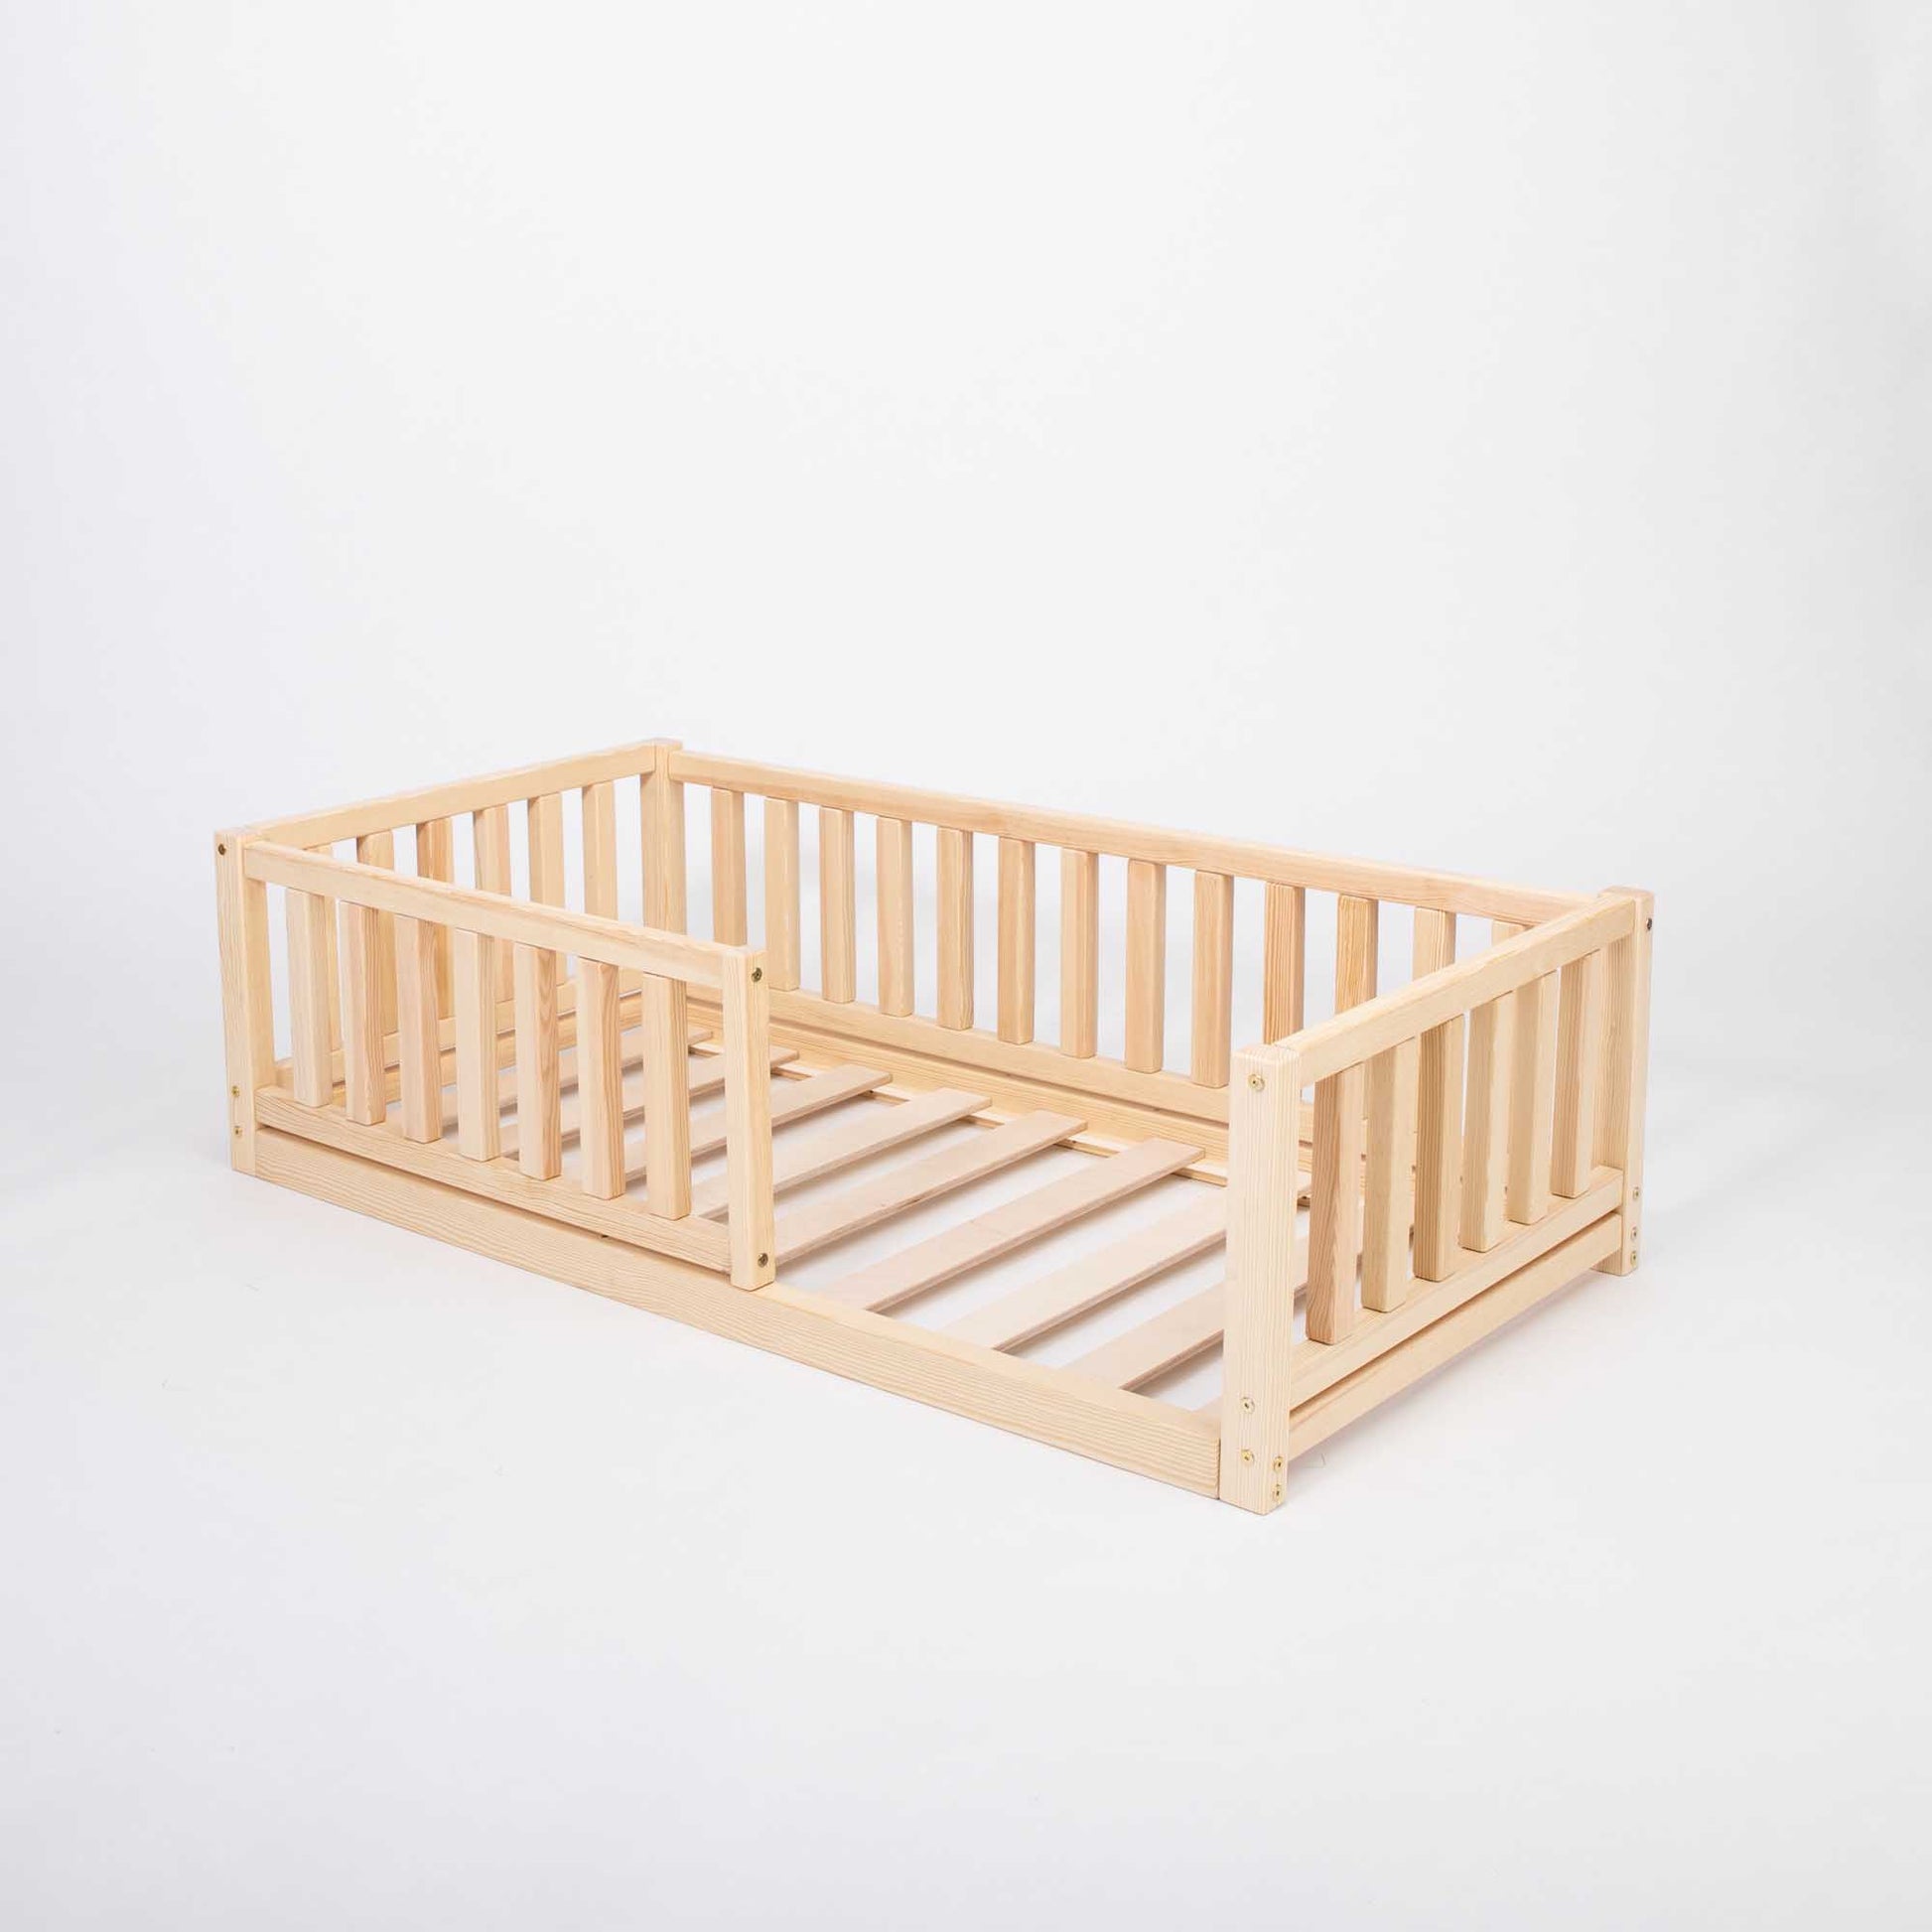 A 2-in-1 Sweet Home From Wood toddler bed on legs with a vertical rail fence, made from solid pine.